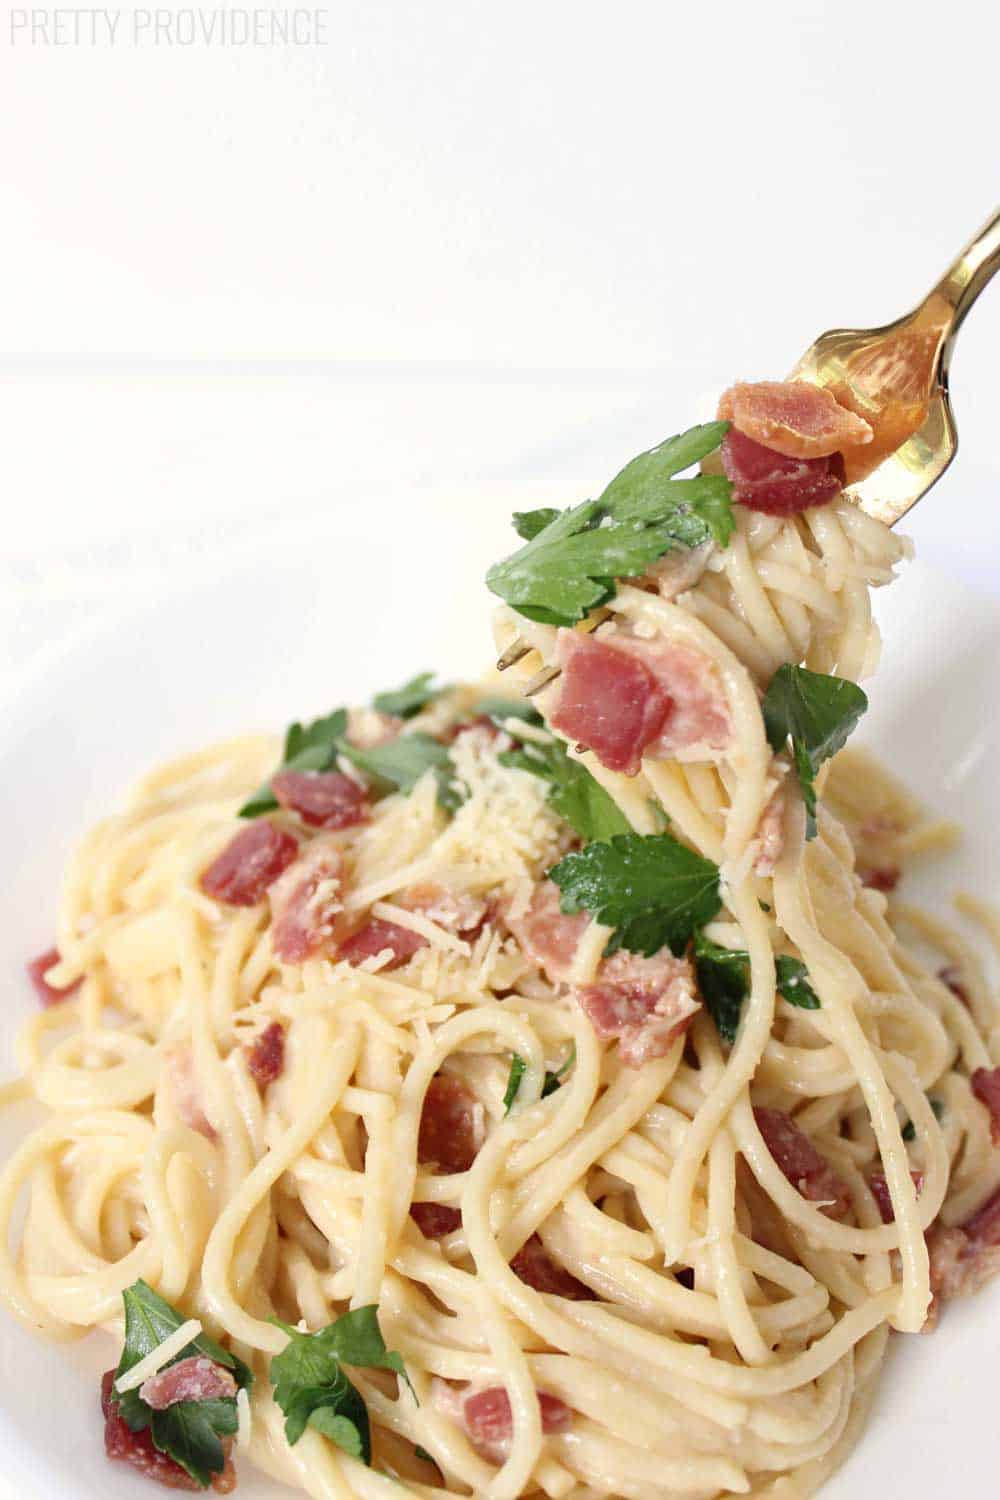 This easy spaghetti carbonara recipe is creamy and delicious - you can't go wrong with bacon and pasta!